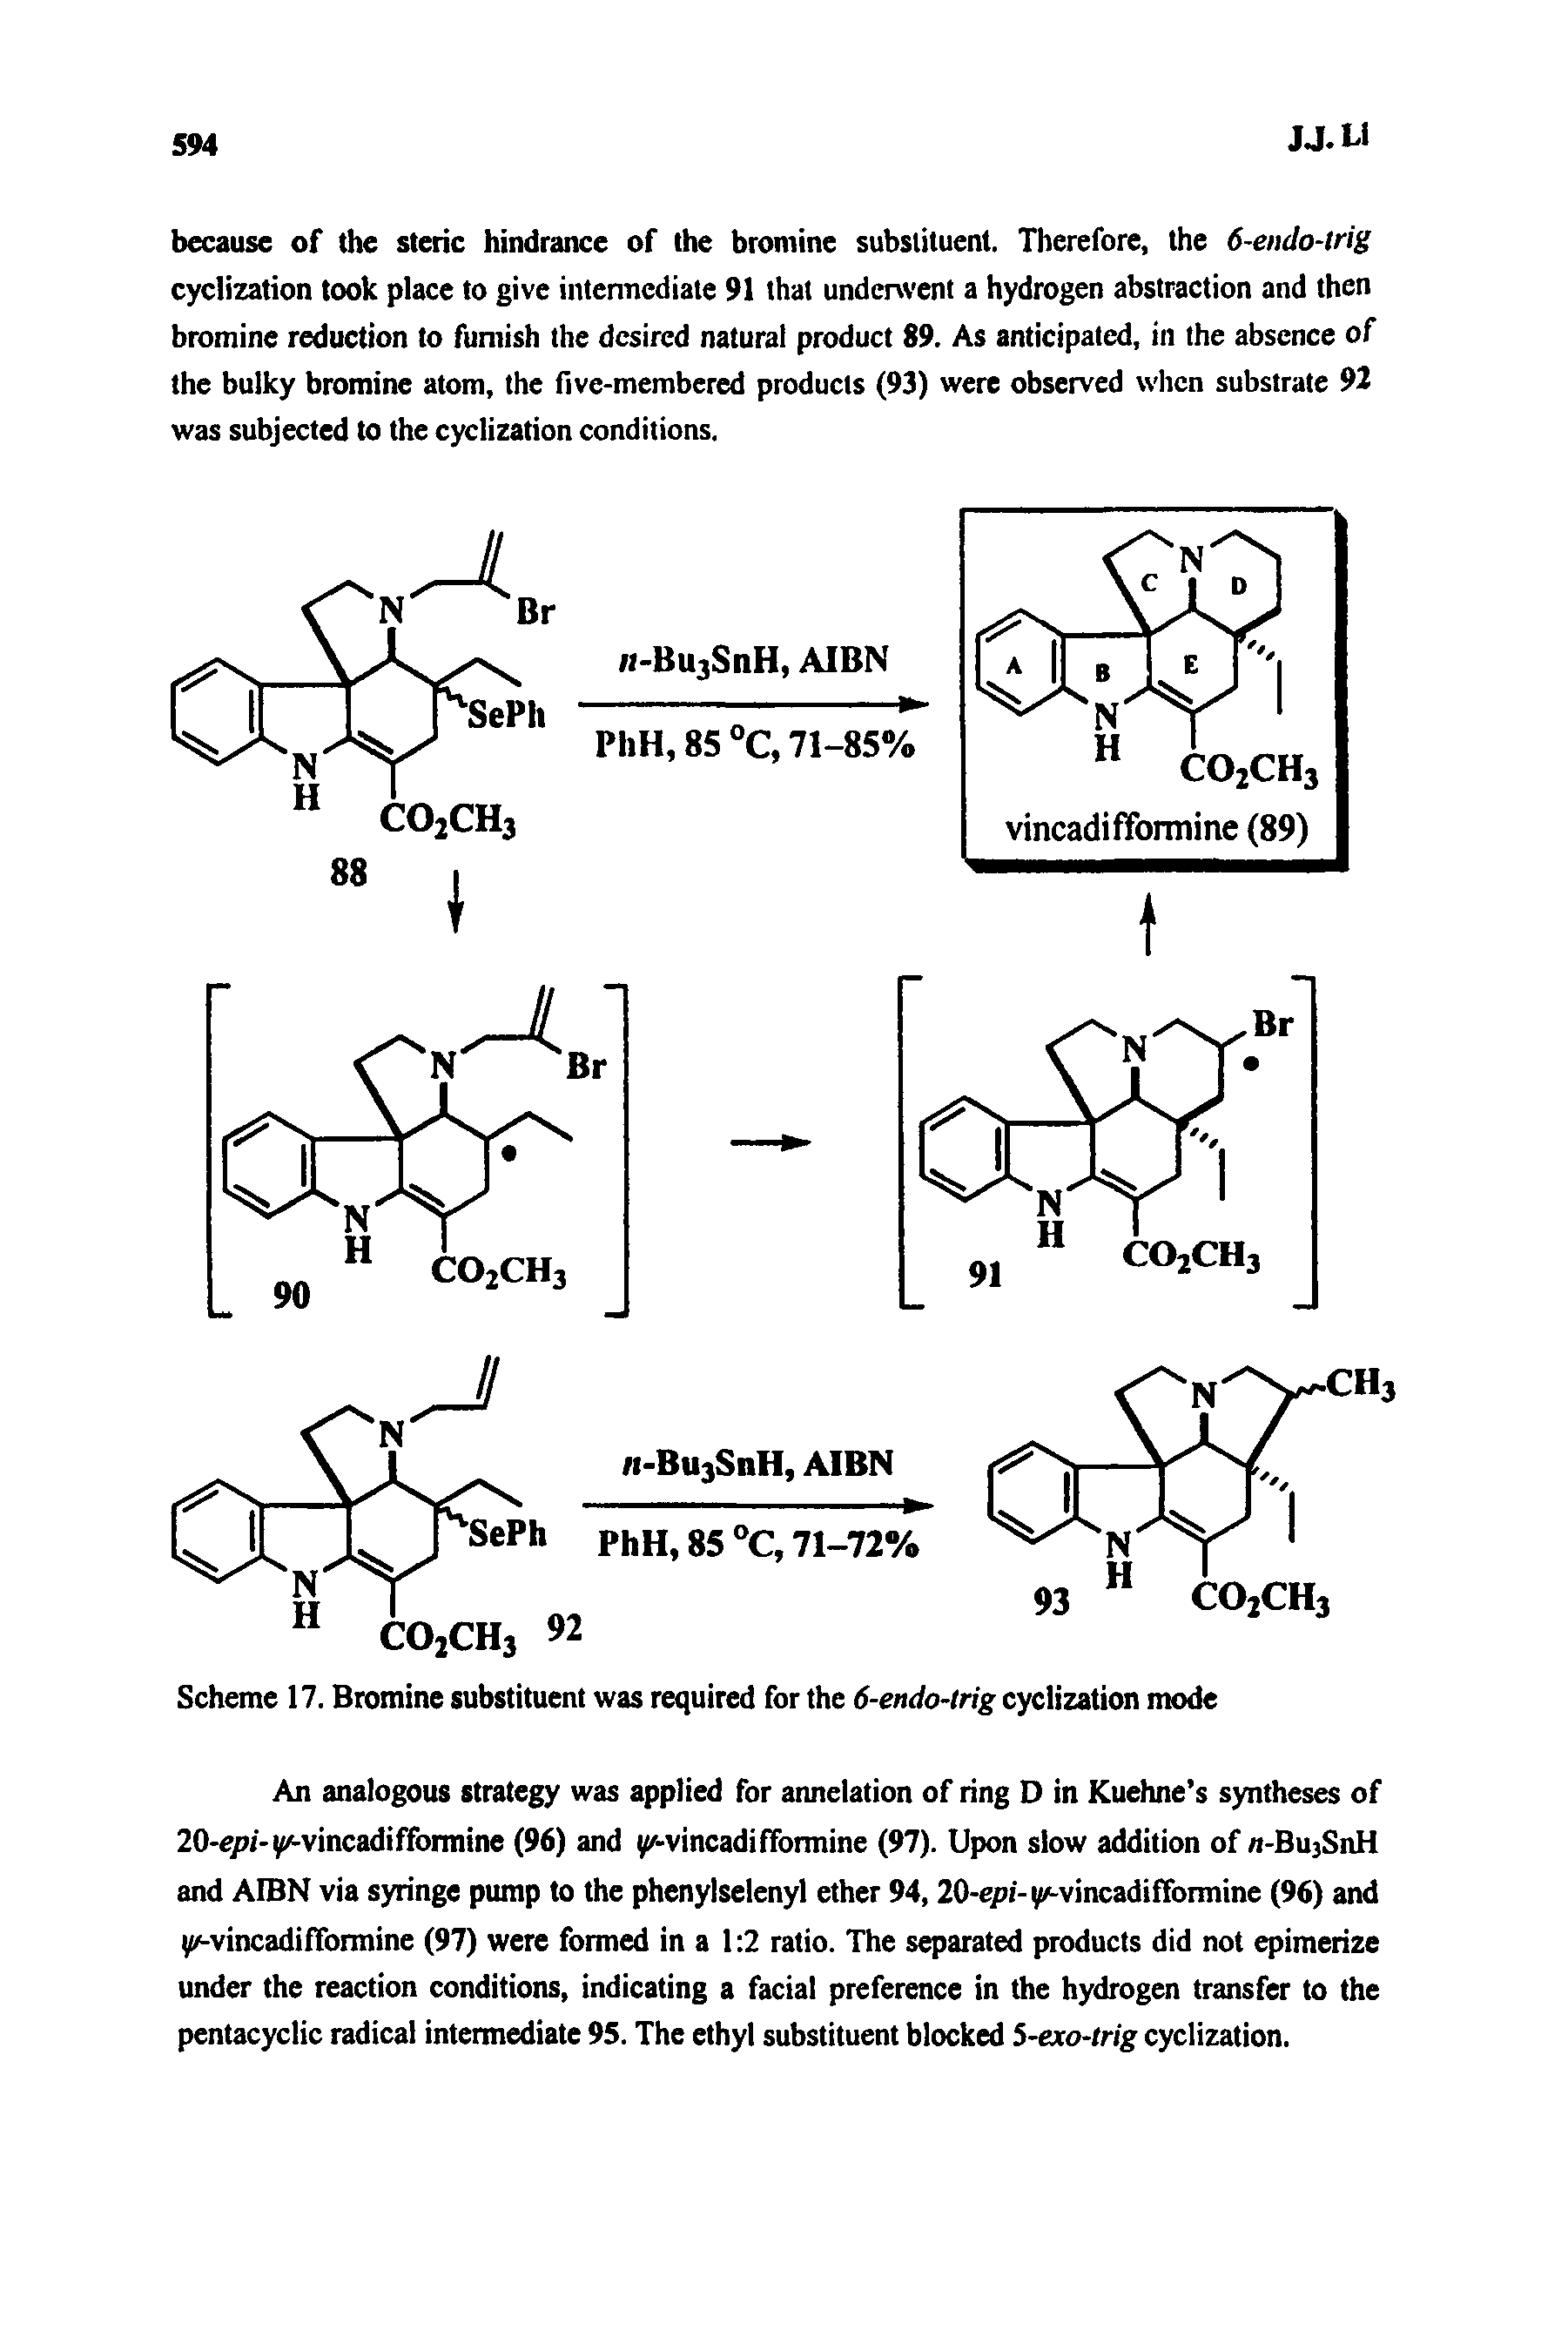 Scheme 17. Bromine substituent was required for the 6-endo-trig cyclization mode...